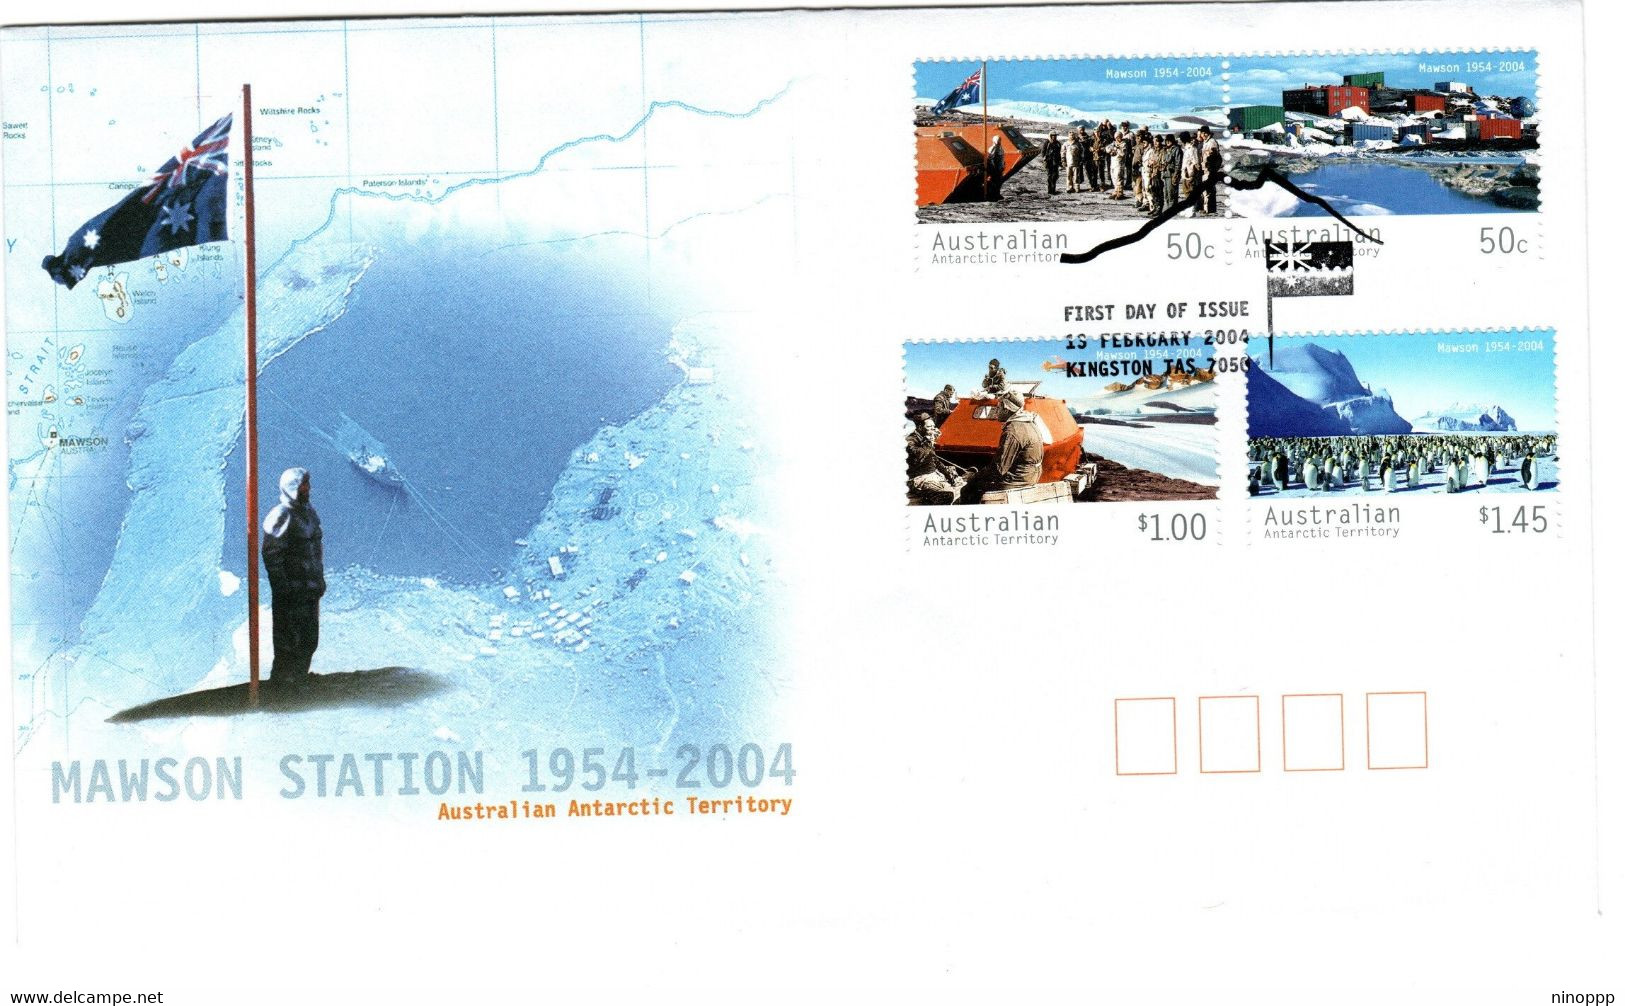 Australian Antarctic Territory 2004 Mawson Station 50th Anniversary, First Day Cover - FDC